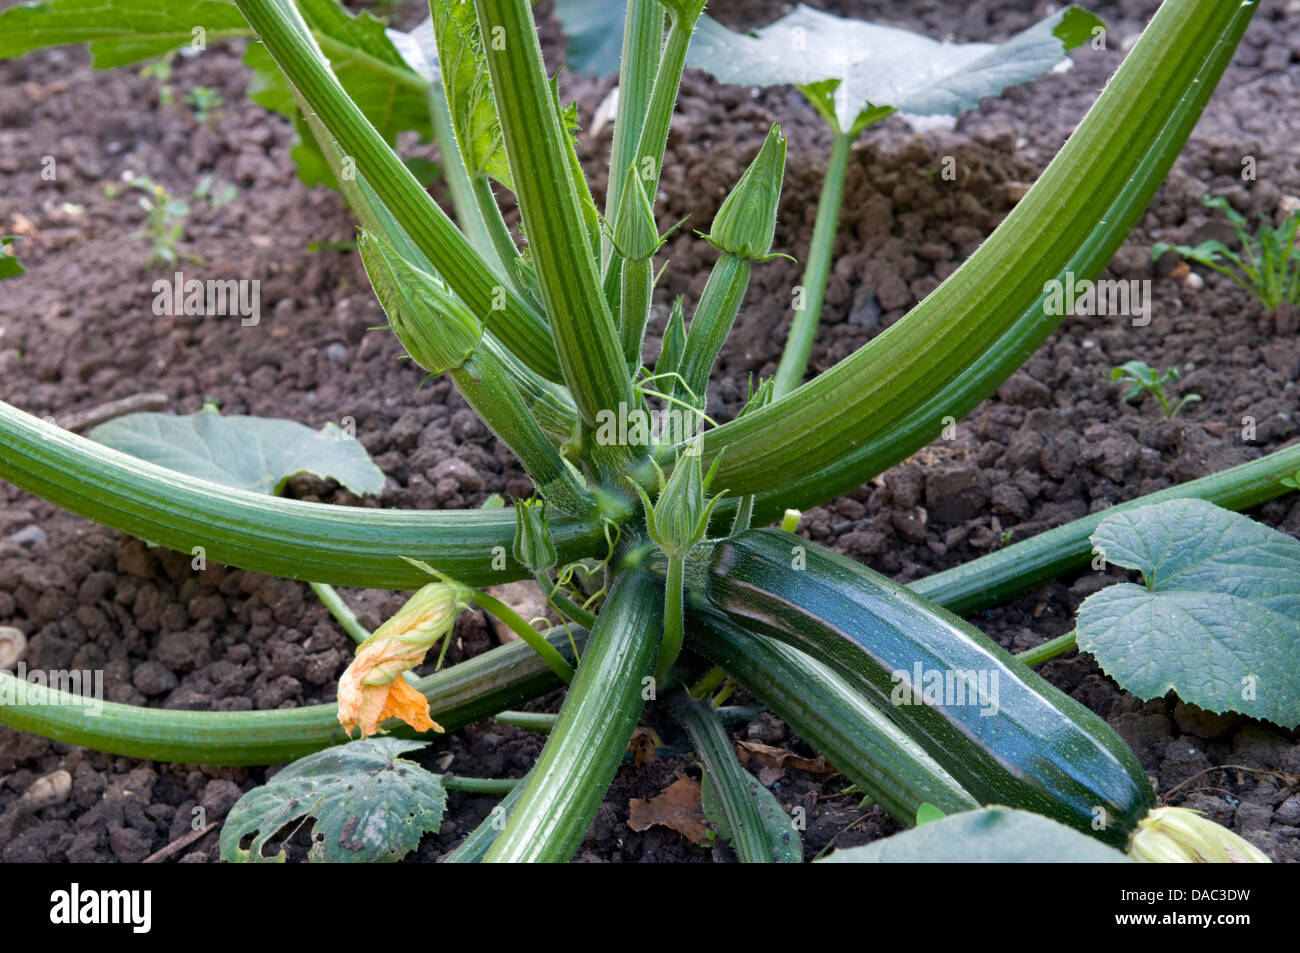 Organic courgette plant Stock Photo